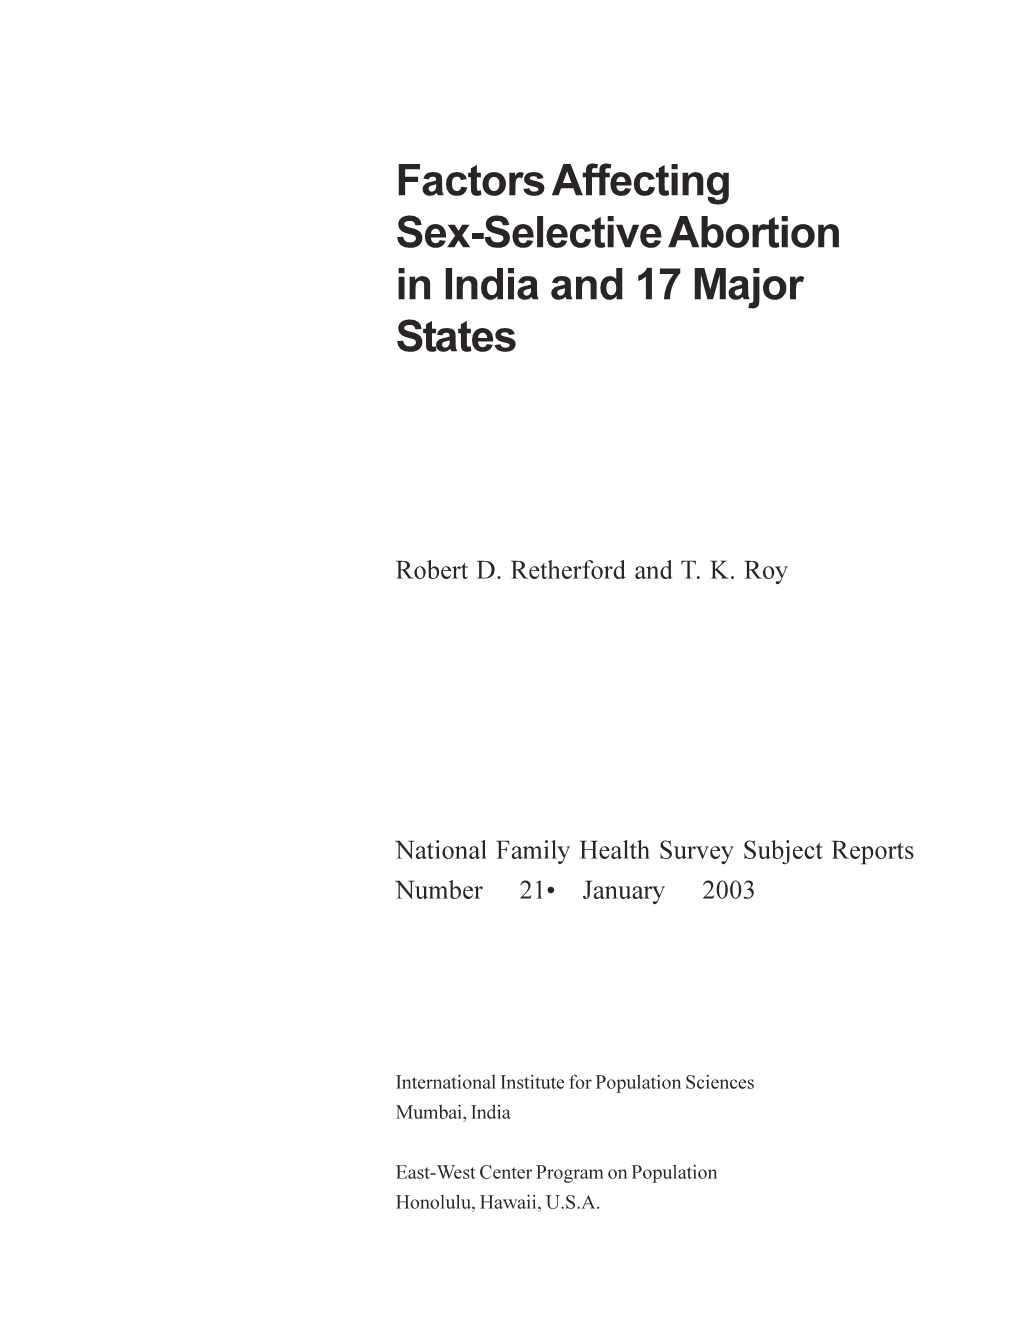 Factors Affecting Sex-Selective Abortion in India and 17 Major States